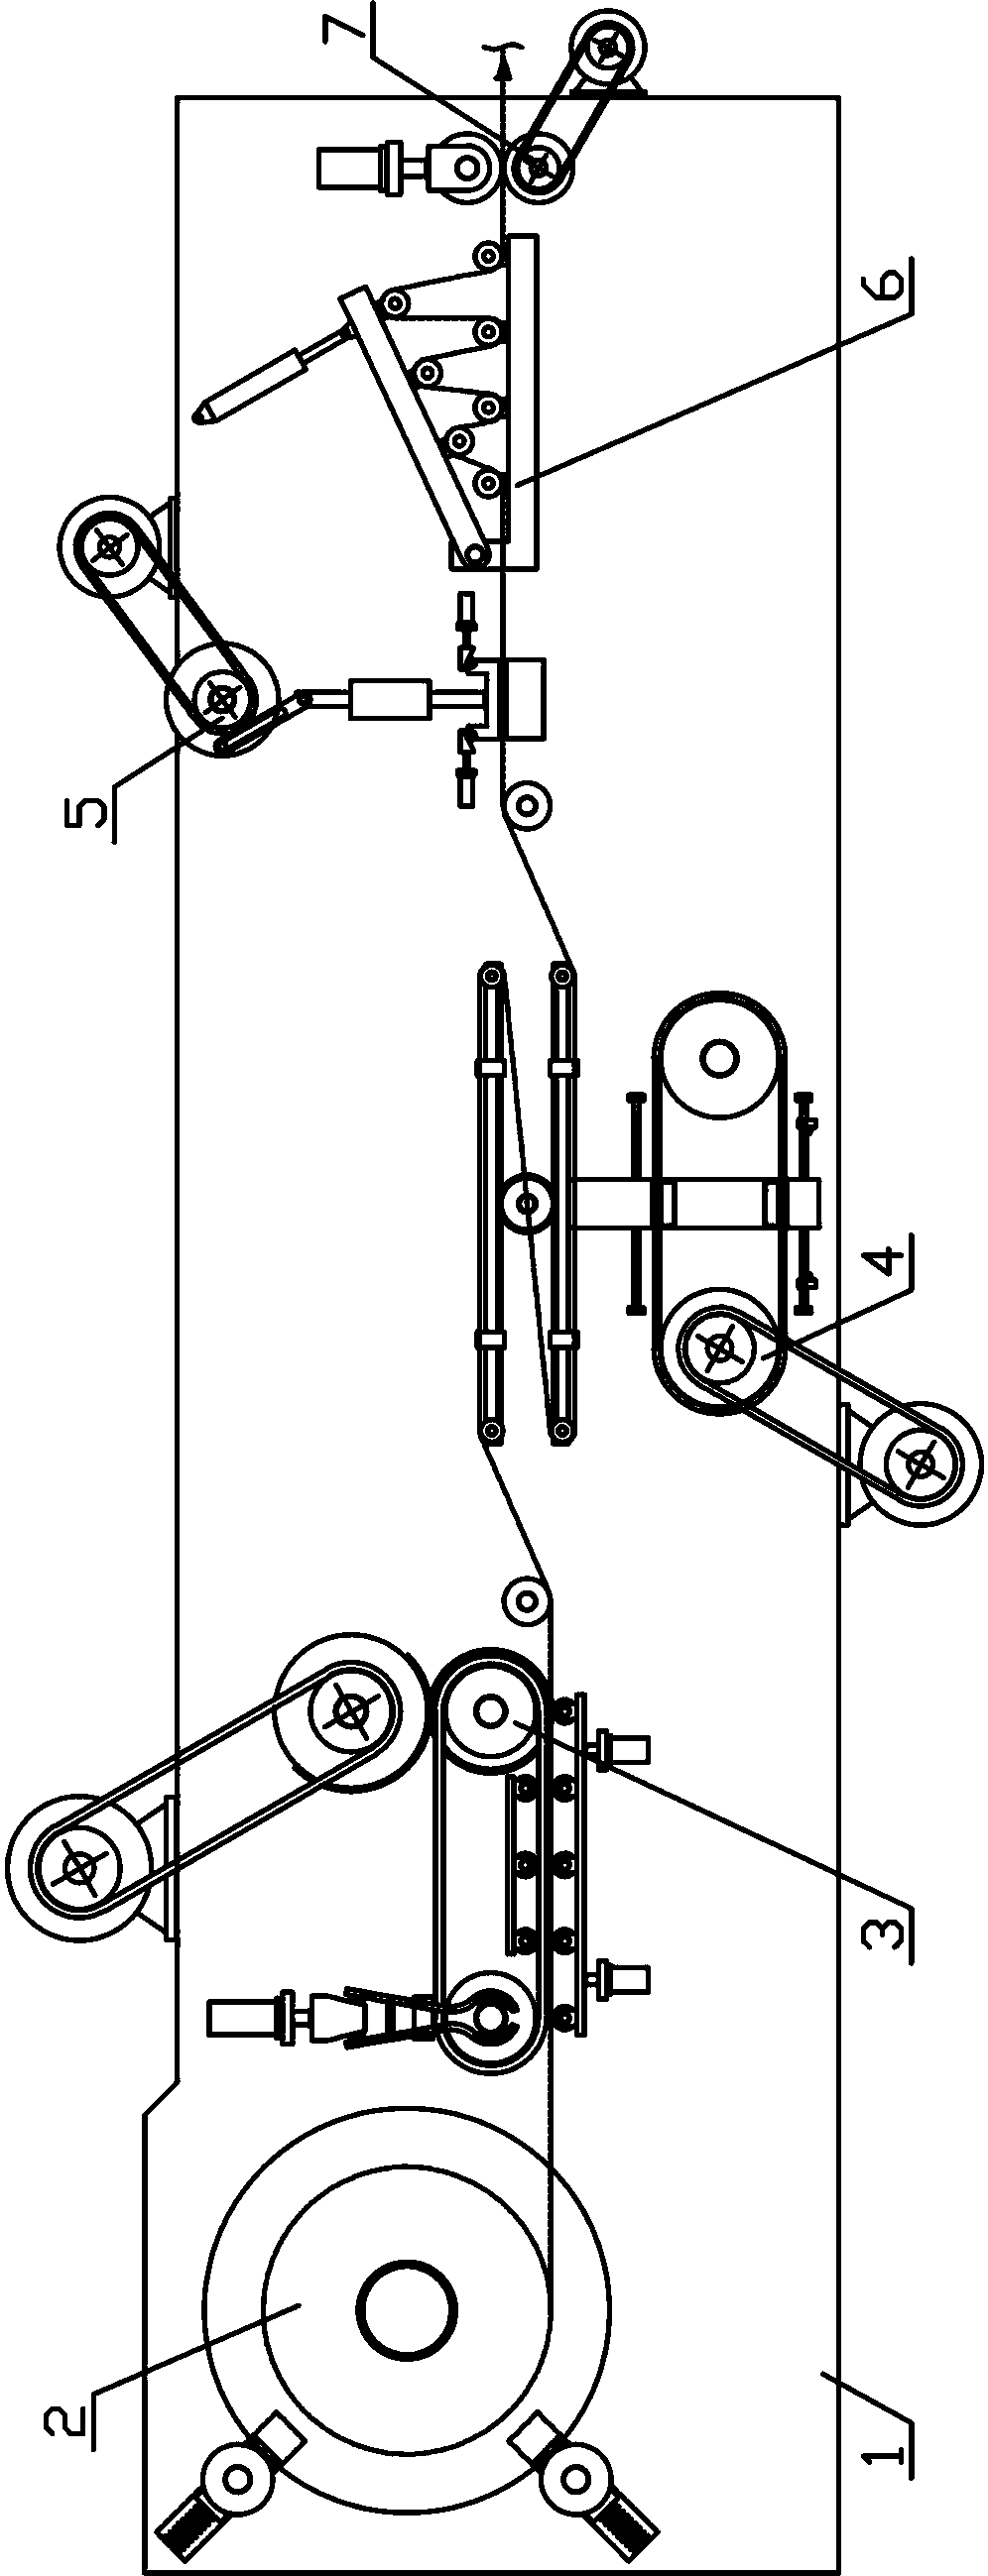 Conveying processing mechanism for yarn